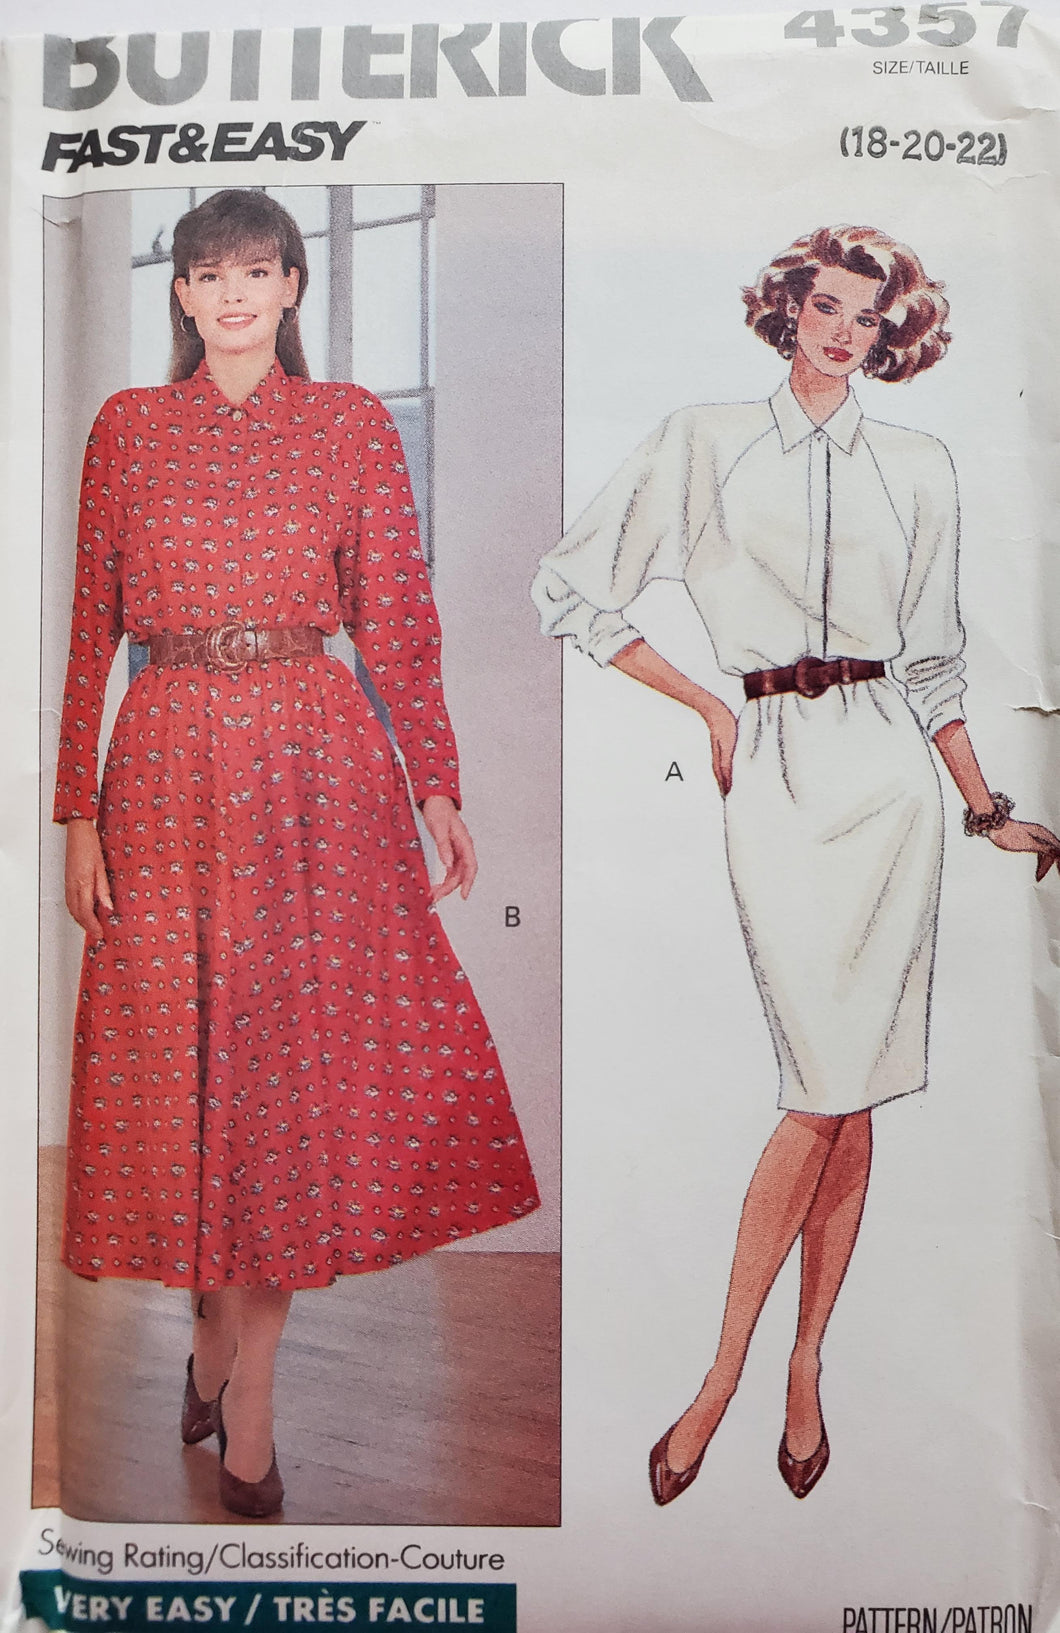 Butterick 4357 UNCUT, UNUSED Fast and Easy Dress with Raglan Sleeves, Size 18-20-22